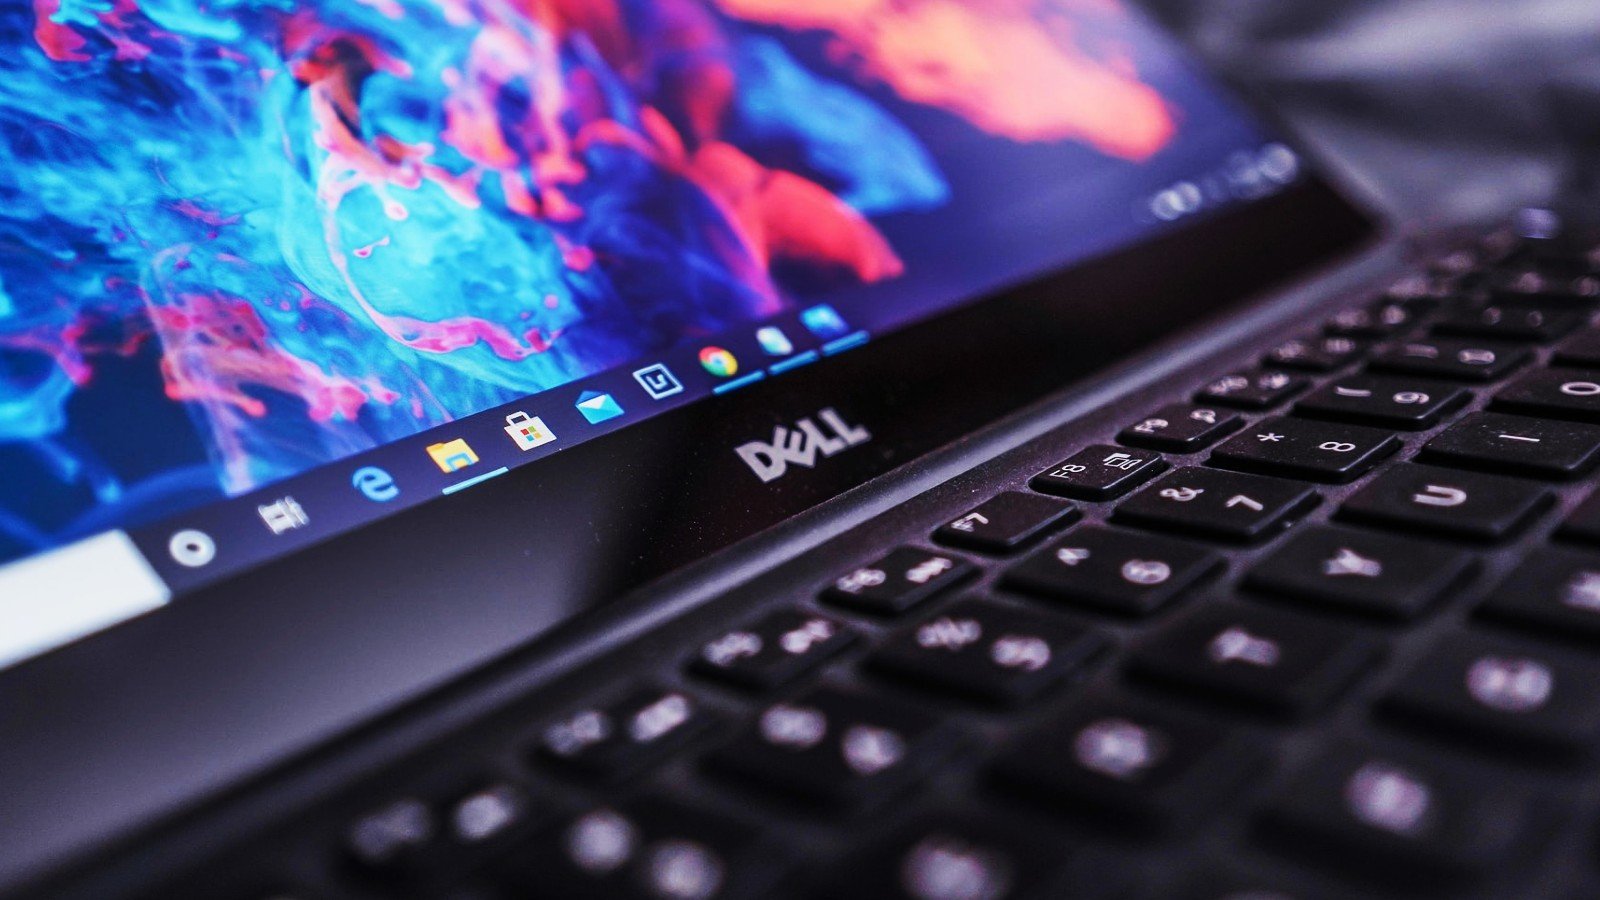 Dell SupportAssist bugs put over 30 million PCs at risk